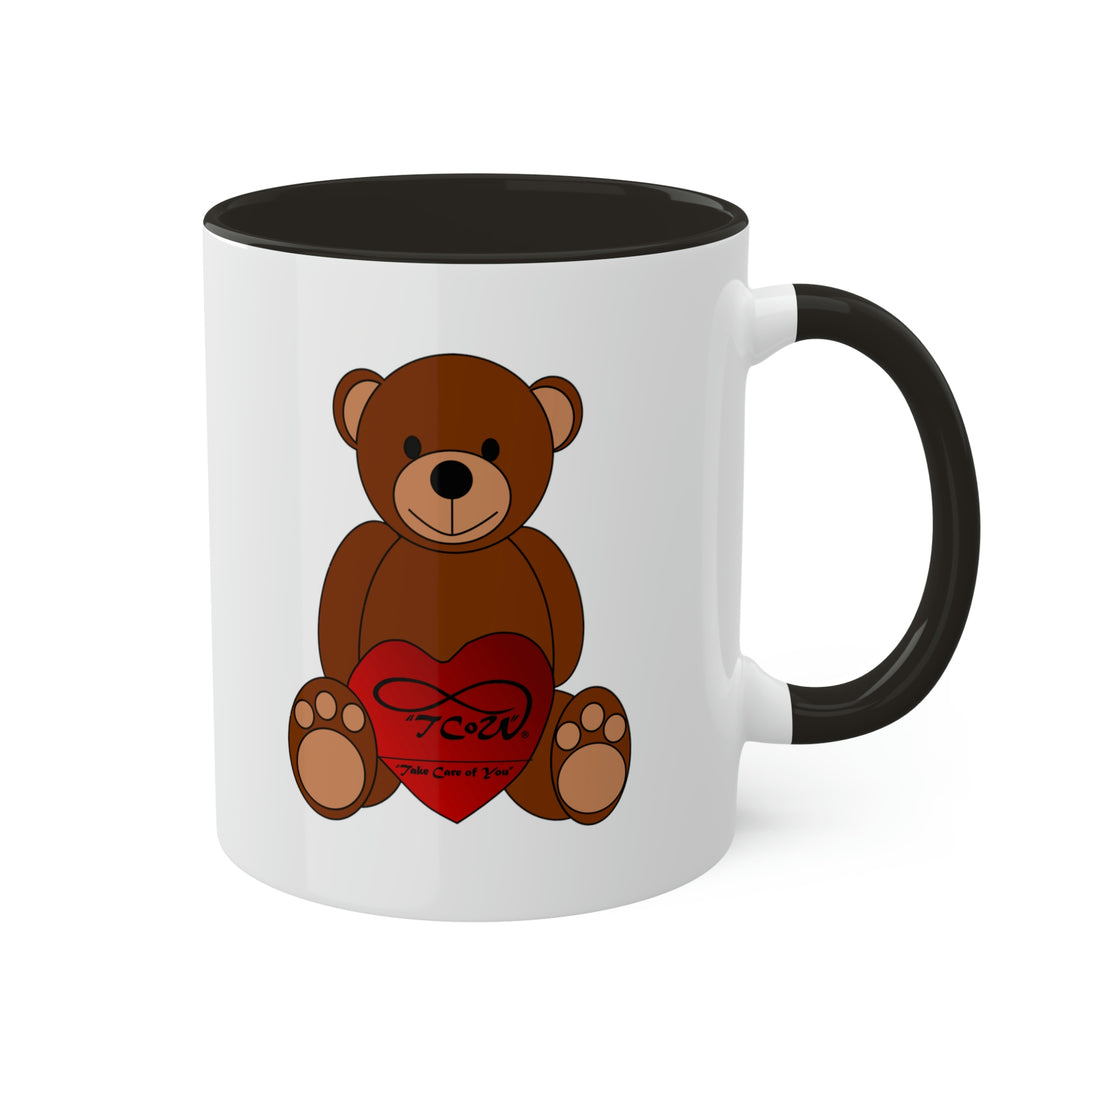 Love Starts With ME! several Color Mugs, 11oz --